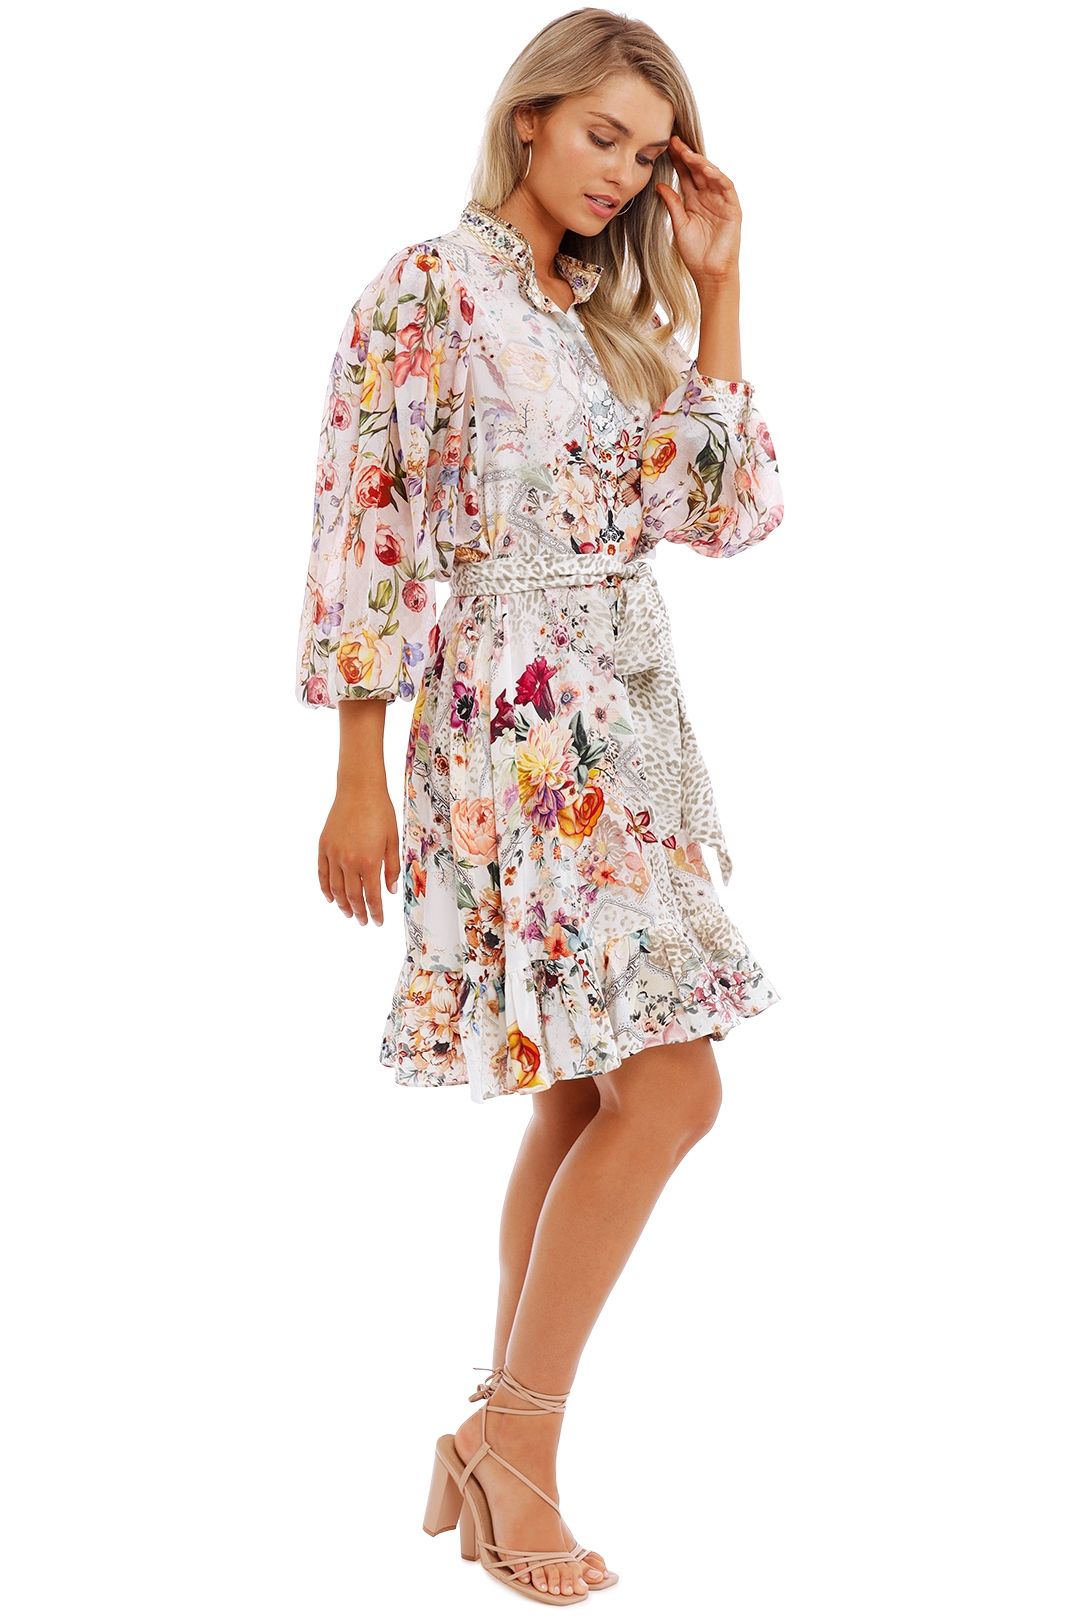 Camilla Drop Sleeve Shirt Dress Sew In Love floral